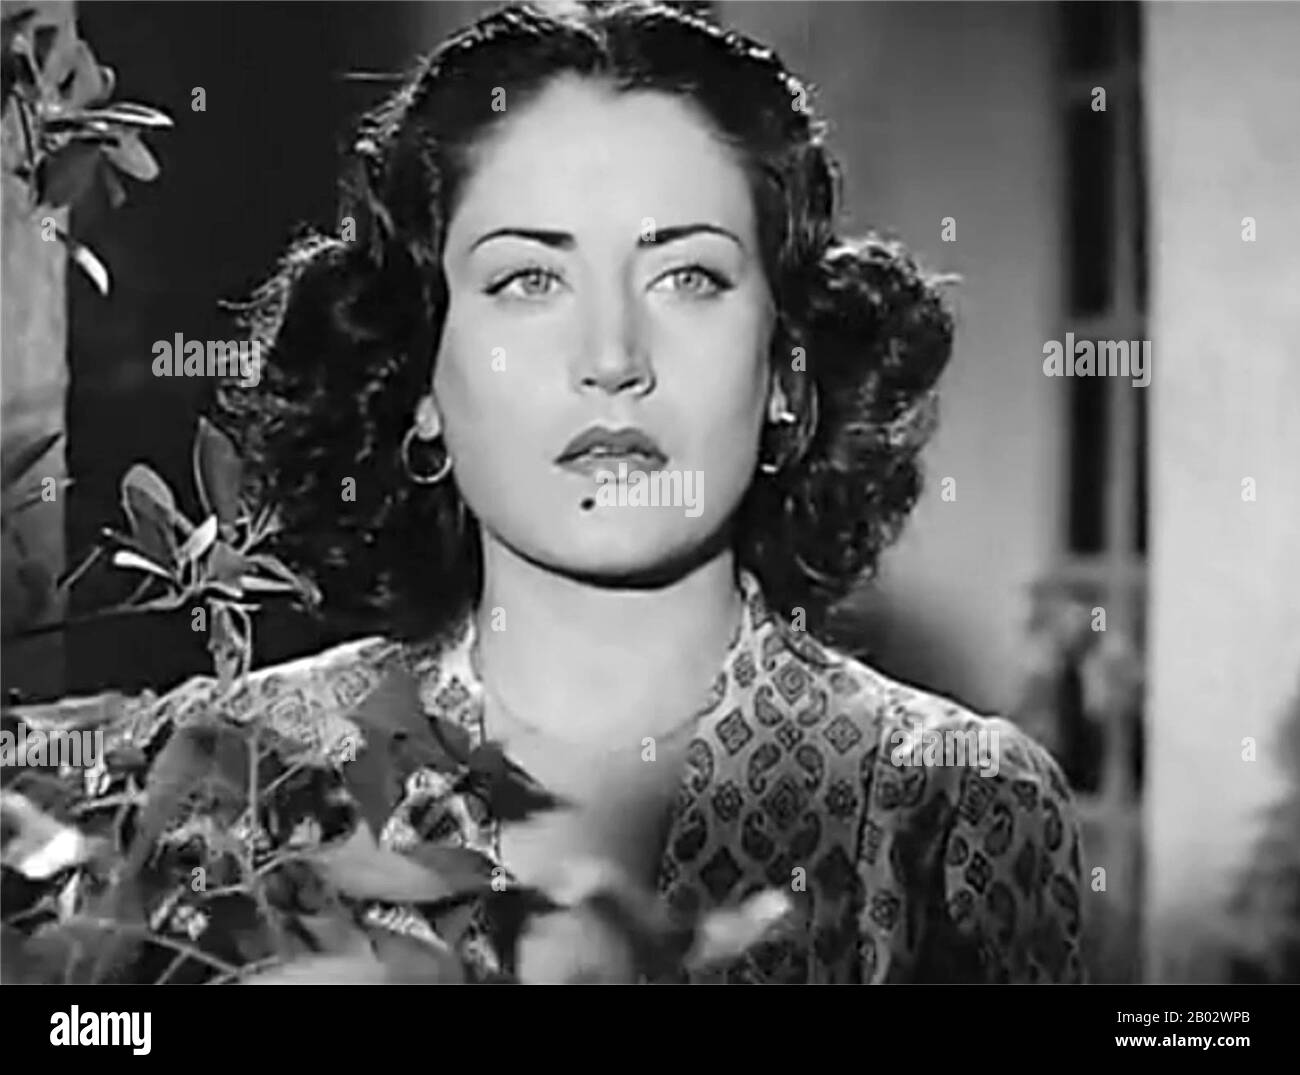 Asmahan was an Arab Druze singer and actress of Syrian origins who lived in Egypt. Having immigrated to Egypt in childhood, her family knew the composer Dawood Hosni, and she sang the compositions of Mohamed El Qasabgi and Zakariyya Ahmad. She also sang the compositions of Mohammed Abdel Wahab and her brother Farid al-Atrash, a then rising star musician in his own right.  Hers was the only female voice in Arab music to pose serious competition to that of Umm Kulthum, who is considered to be one of the Arab world's most distinguished singers of the 20th century. Her mysterious death in an autom Stock Photo